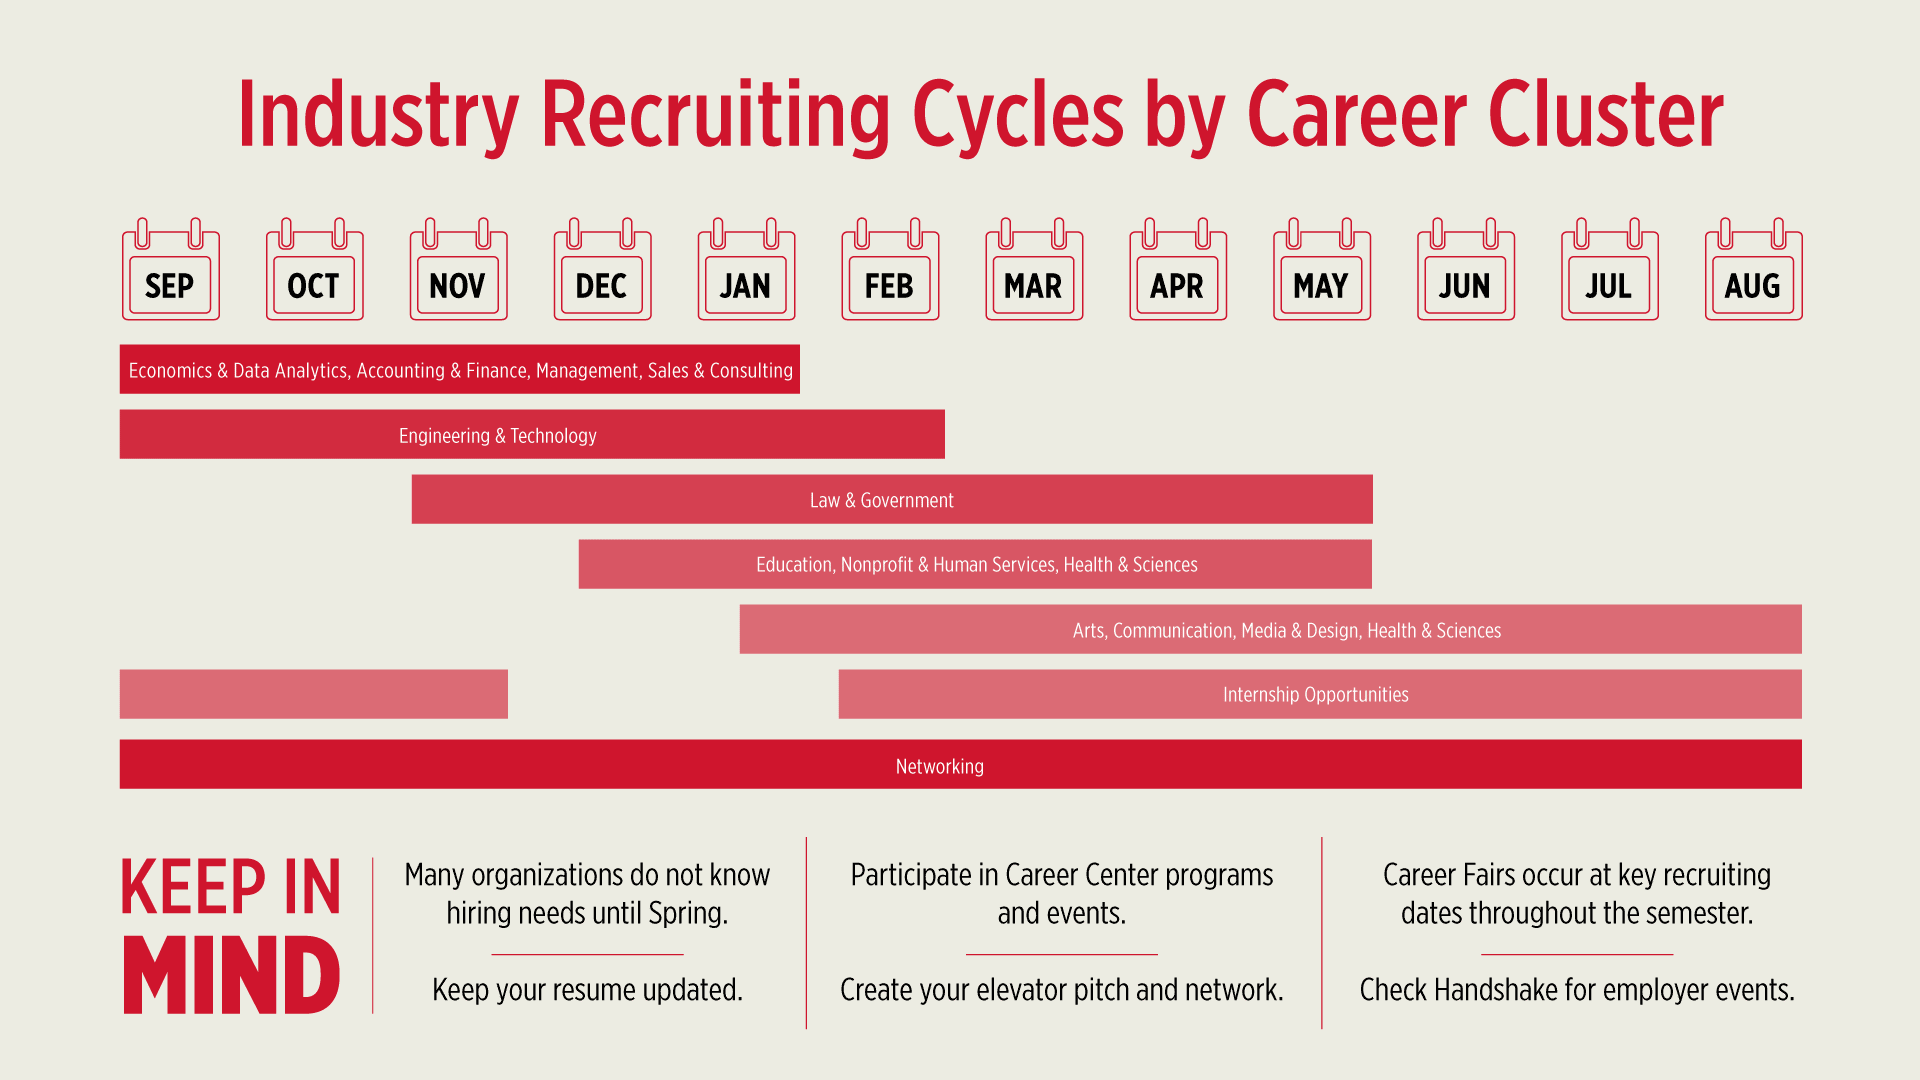 infographic showing recruiting months for various career clusters